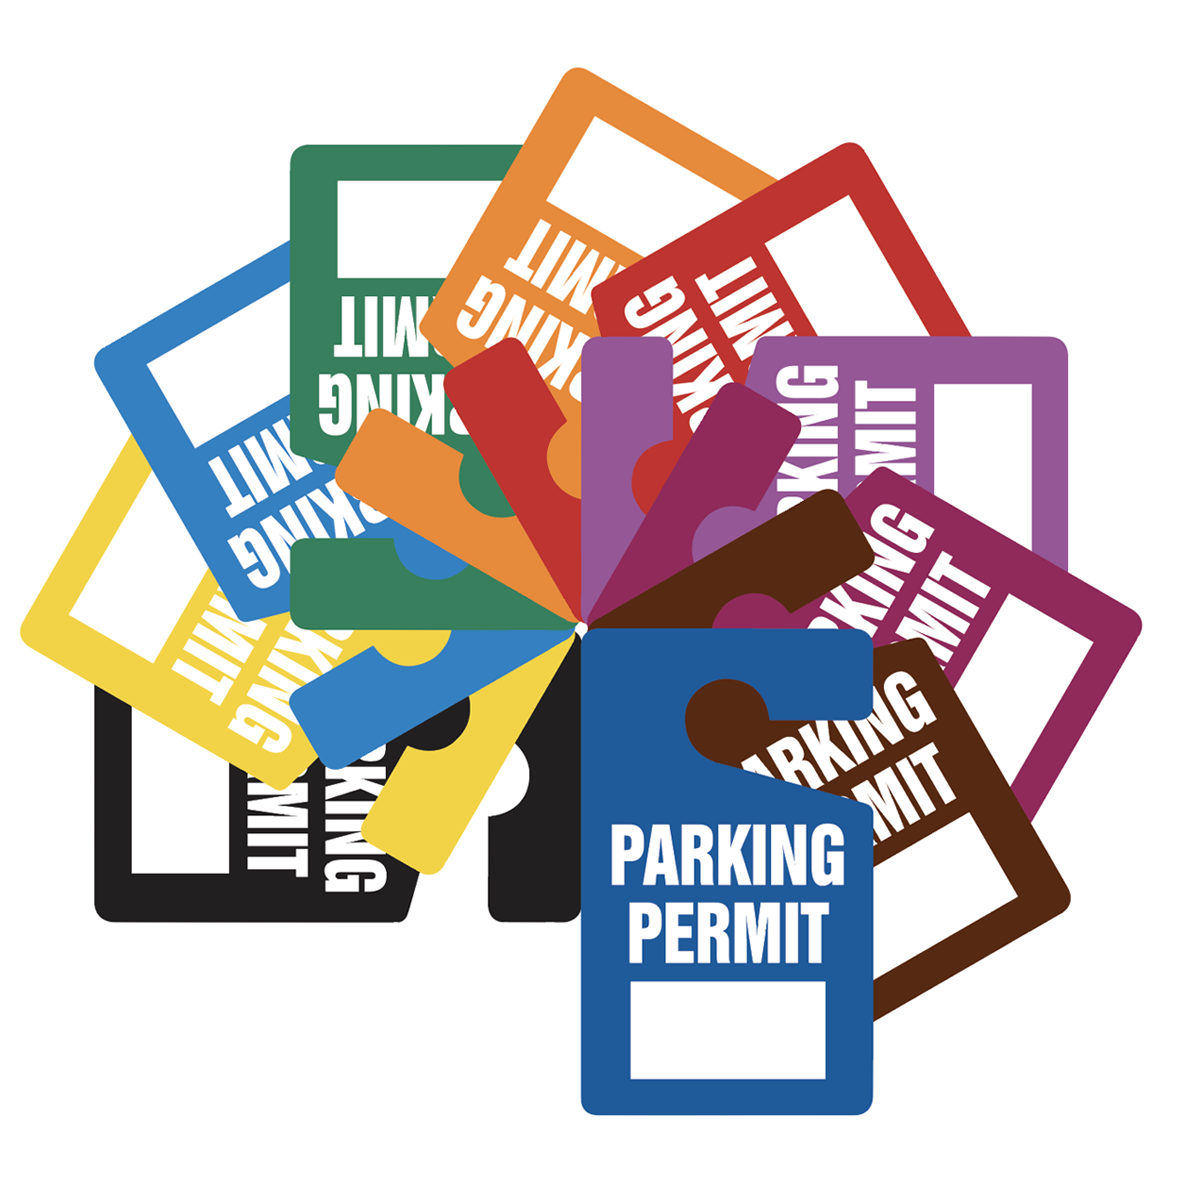 Parking Permit Hang Tags for Parking Lots & Garages